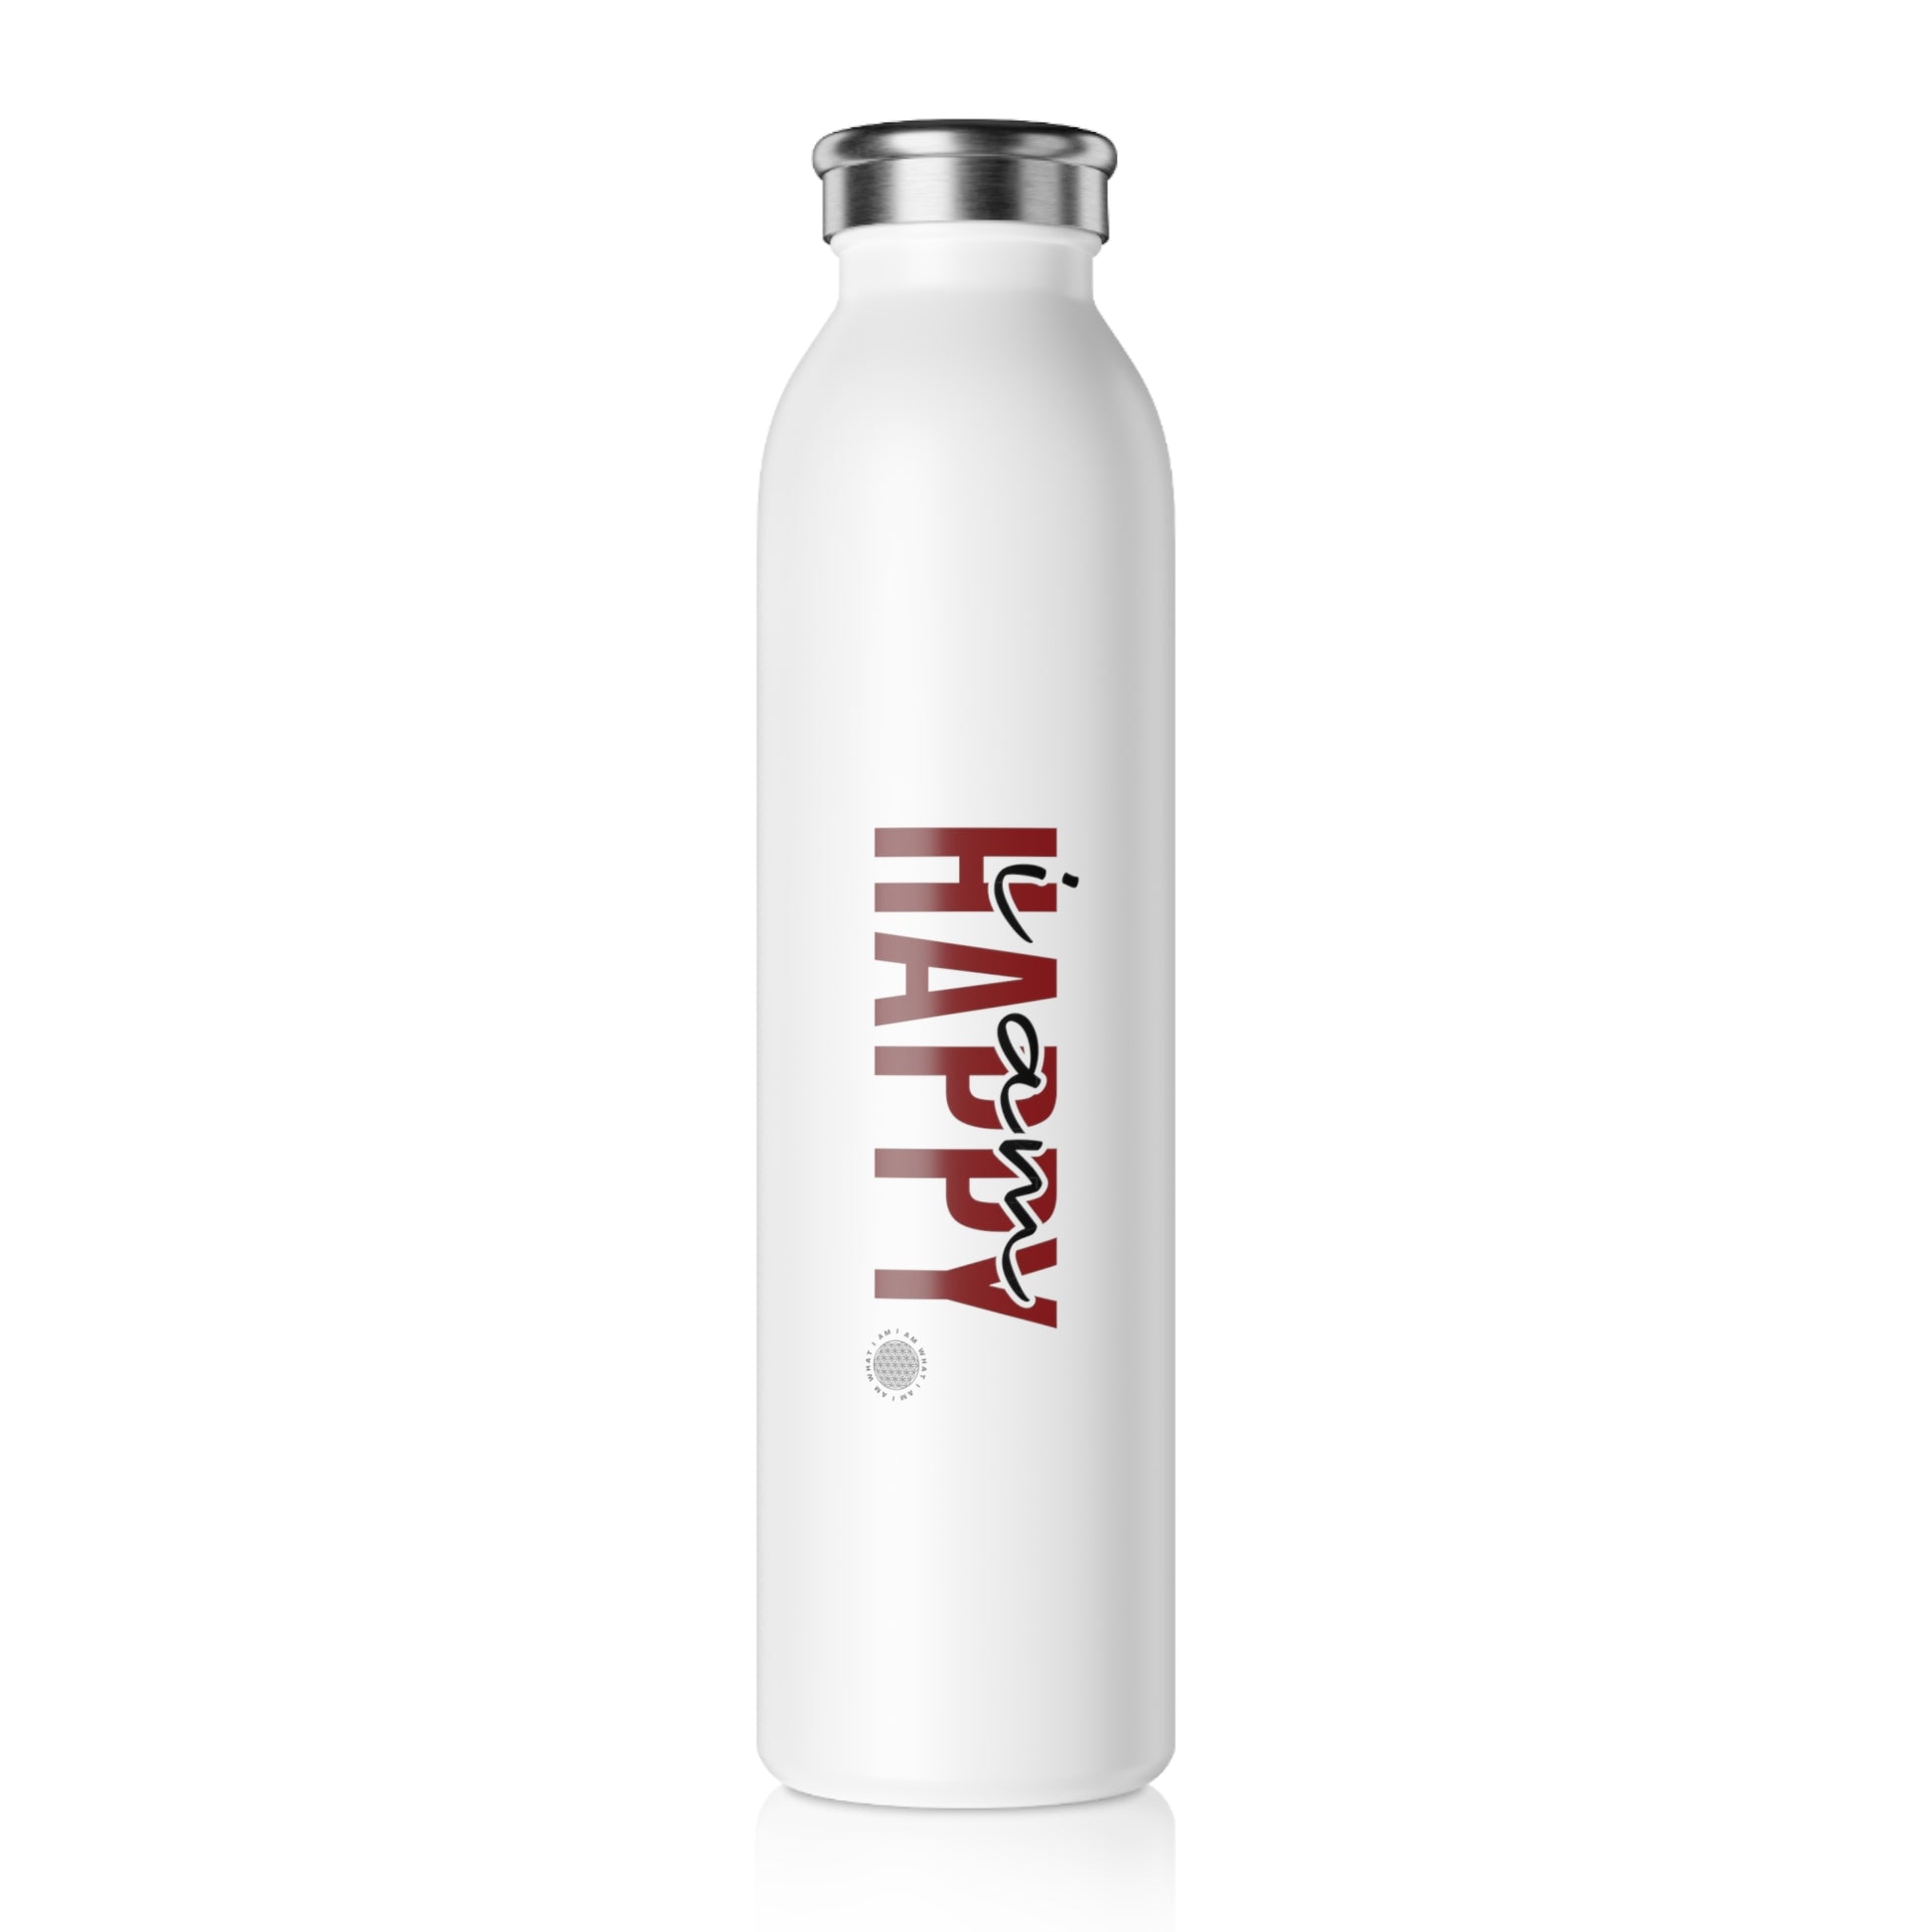 Our I Am Happy affirmation water bottle is one of our positive affirmations for mental health. Positive thinking keeps our mindset happy and healthy. This personalized water bottle was designed to become a creator’s favorite canvas of expression.